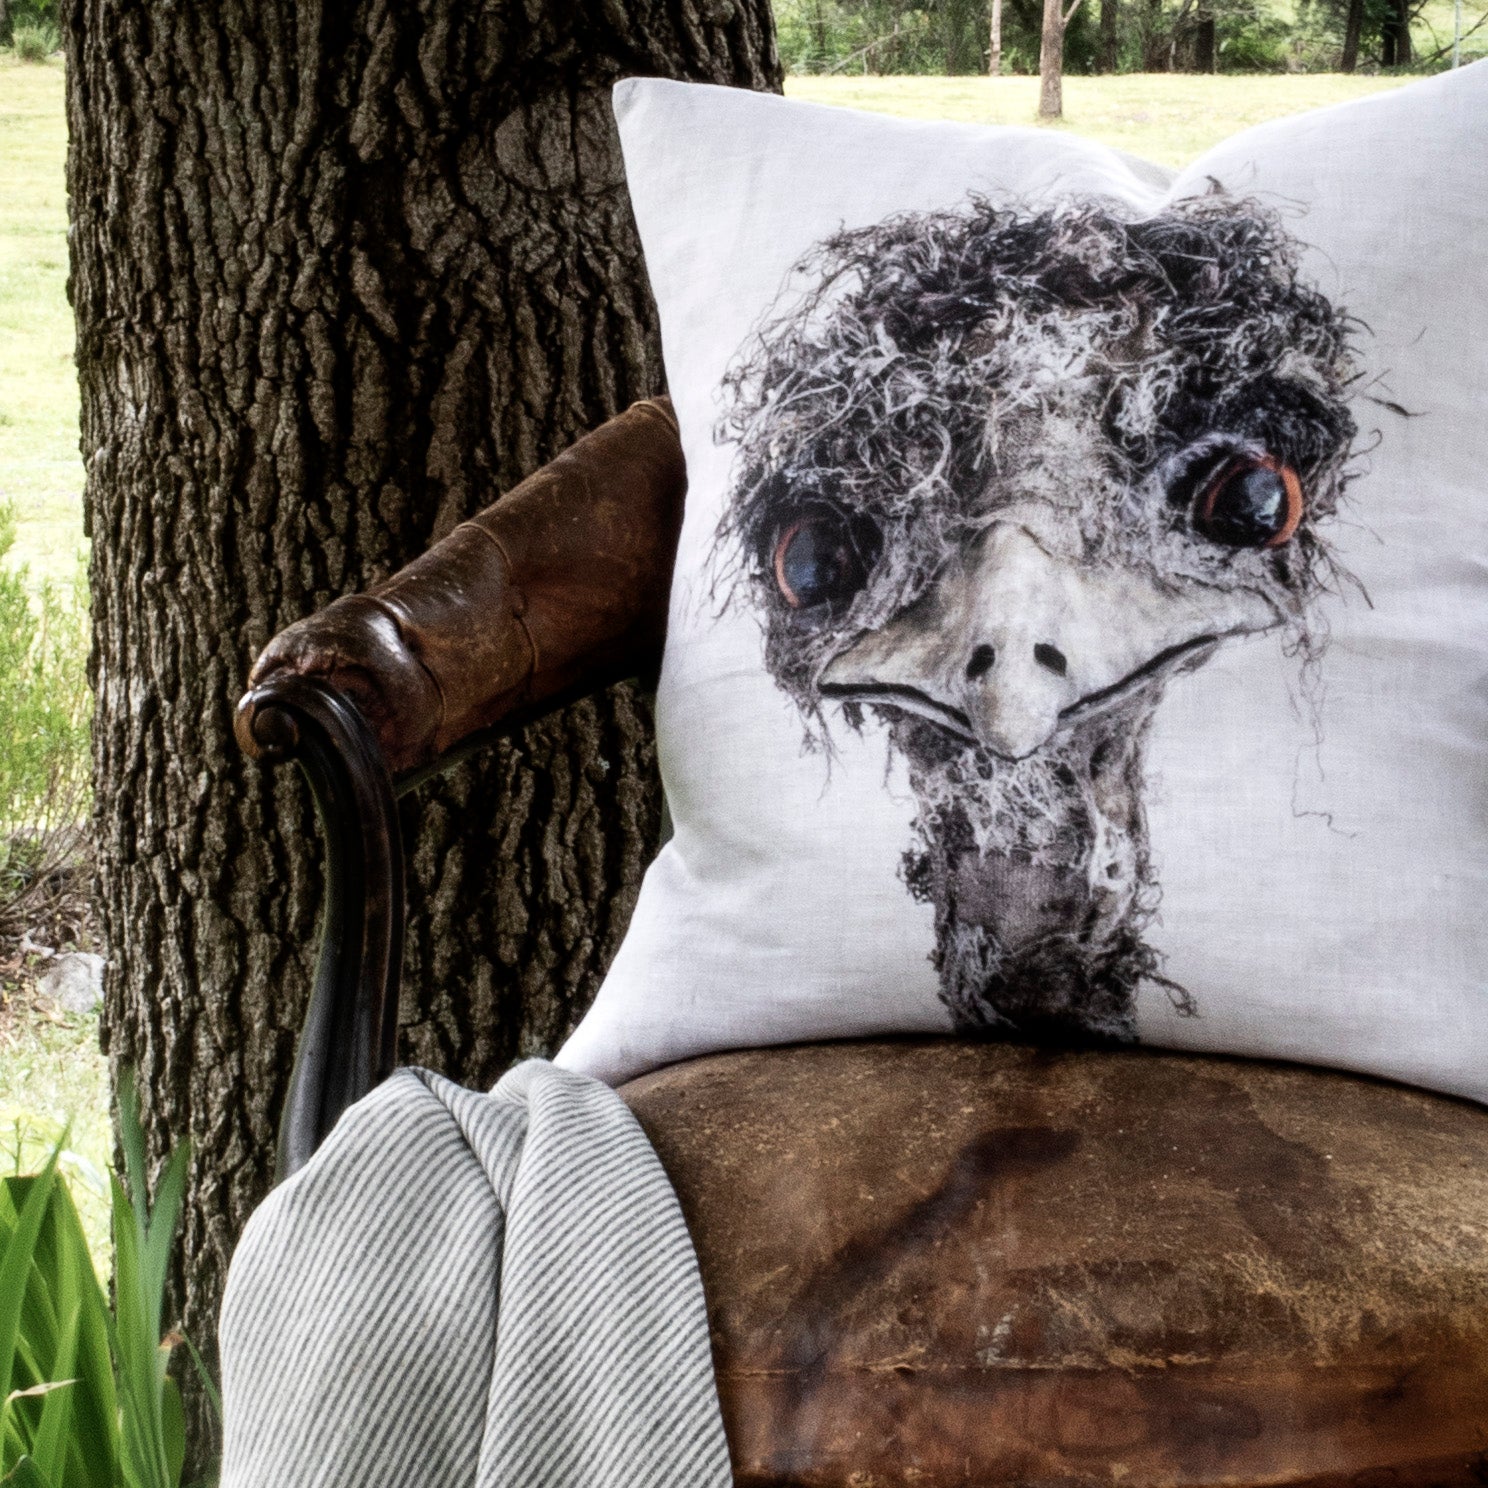 Hilda the Emu Linen Cushion - COVER ONLY